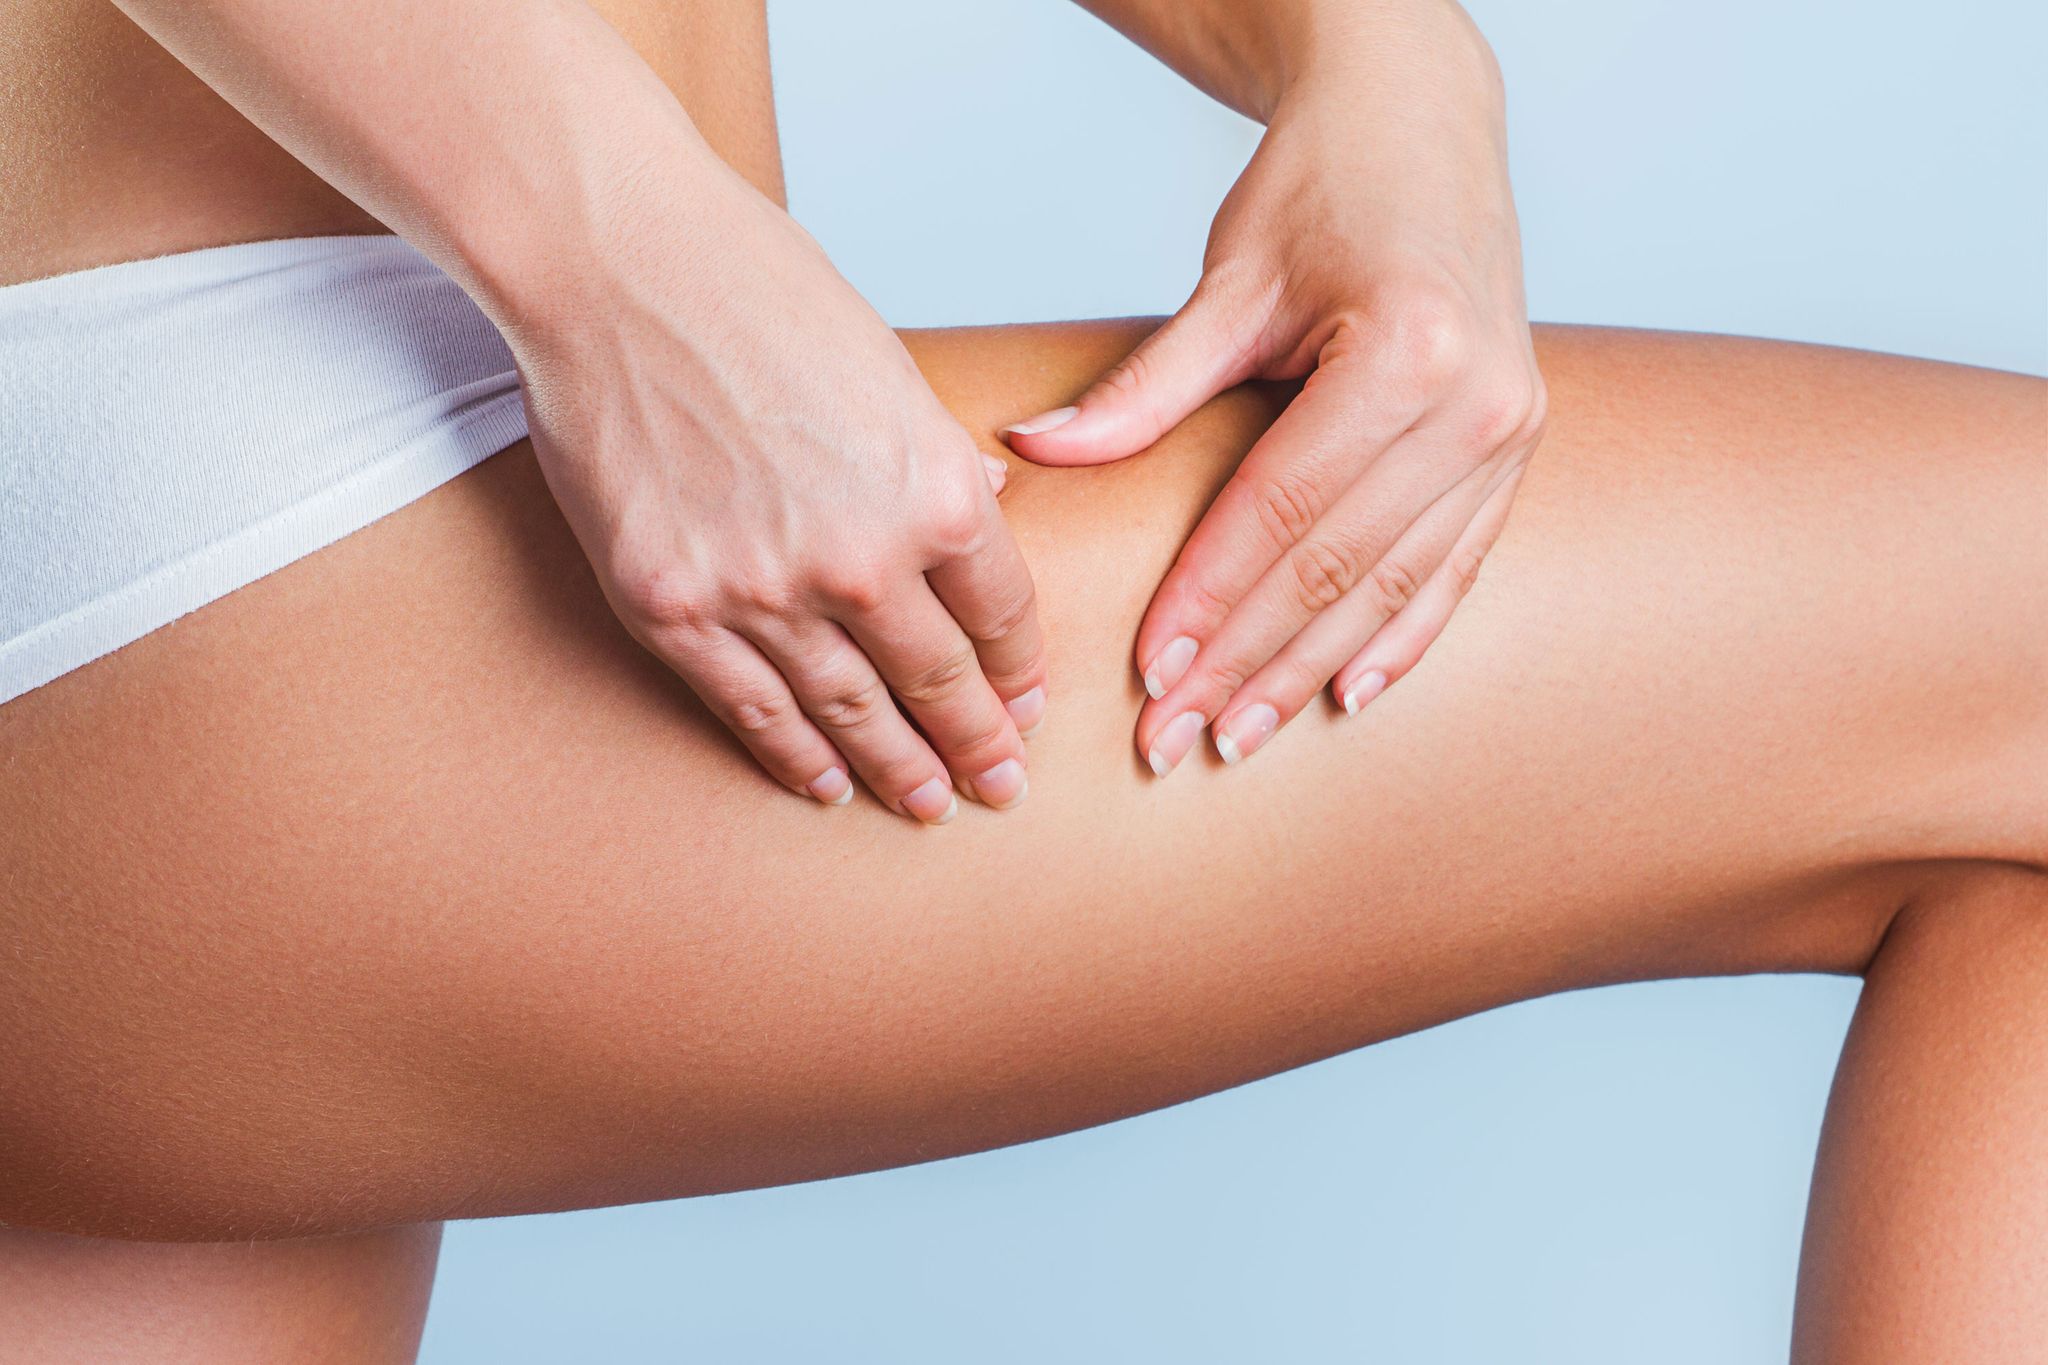 Cellulite treatments explained - what works and what doesn't